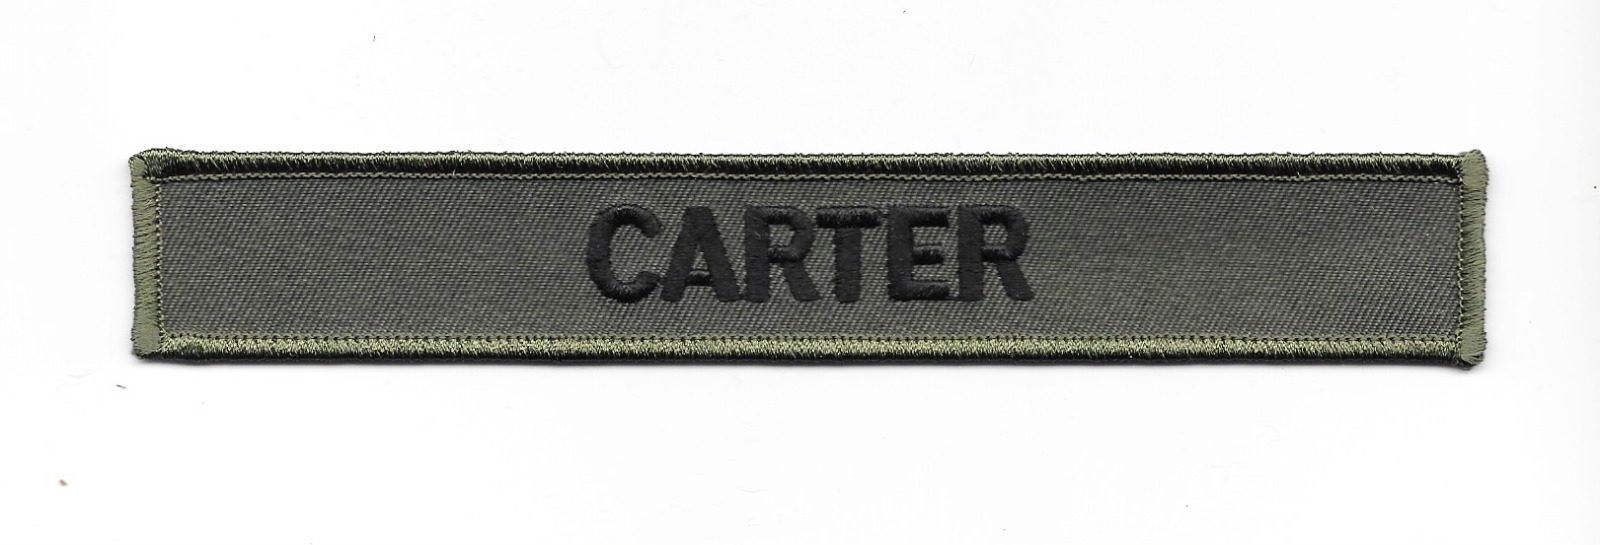 Stargate SG-1 TV Series Carter Uniform Name Chest Embroidered Patch NEW UNUSED